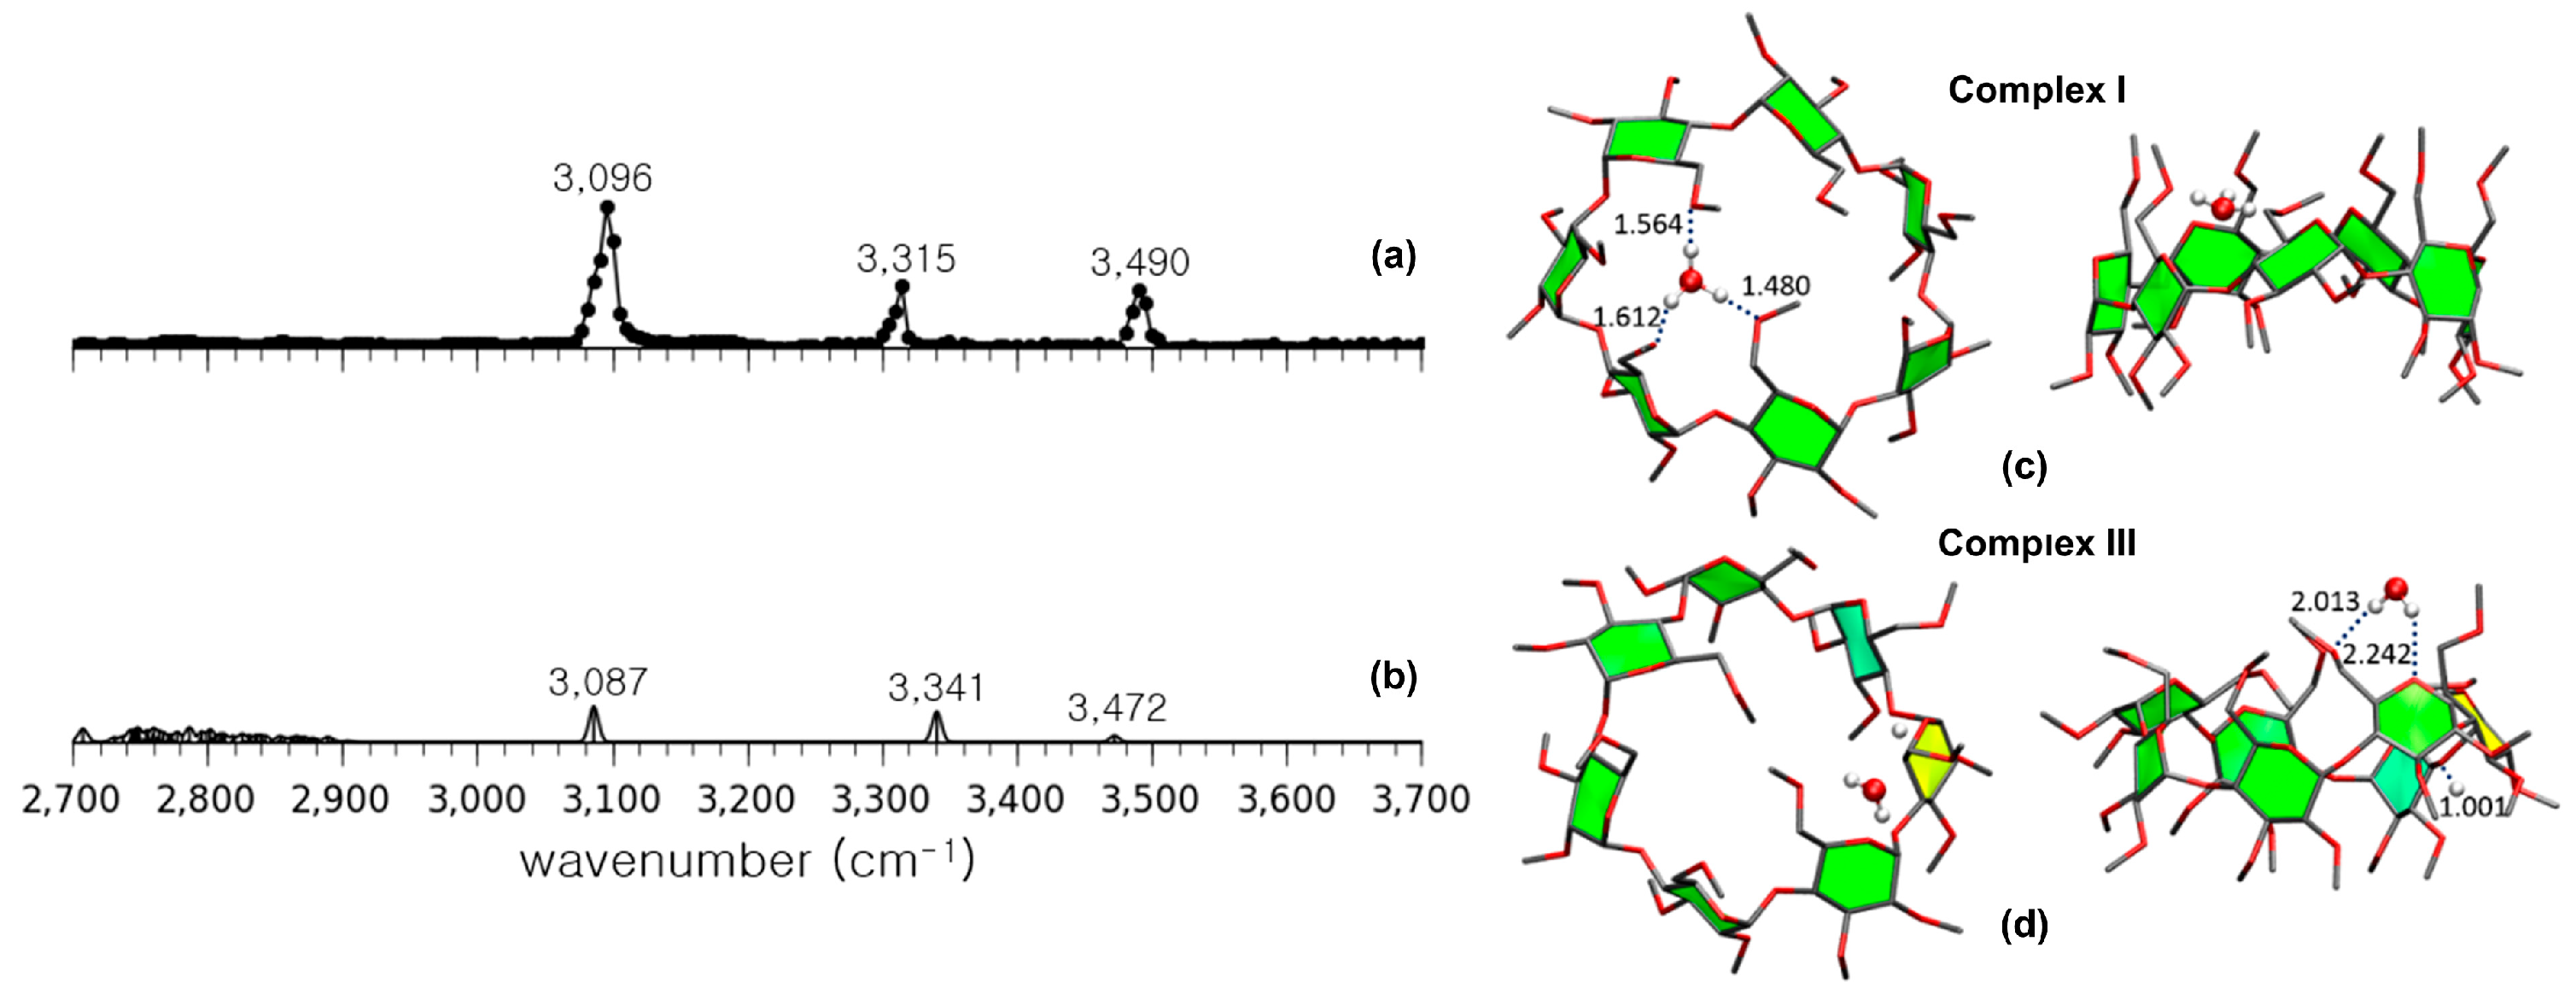 Molecules Free Full Text Noncovalent Complexes Of Cyclodextrin With Small Organic Molecules Applications And Insights Into Host Guest Interactions In The Gas Phase And Condensed Phase Html